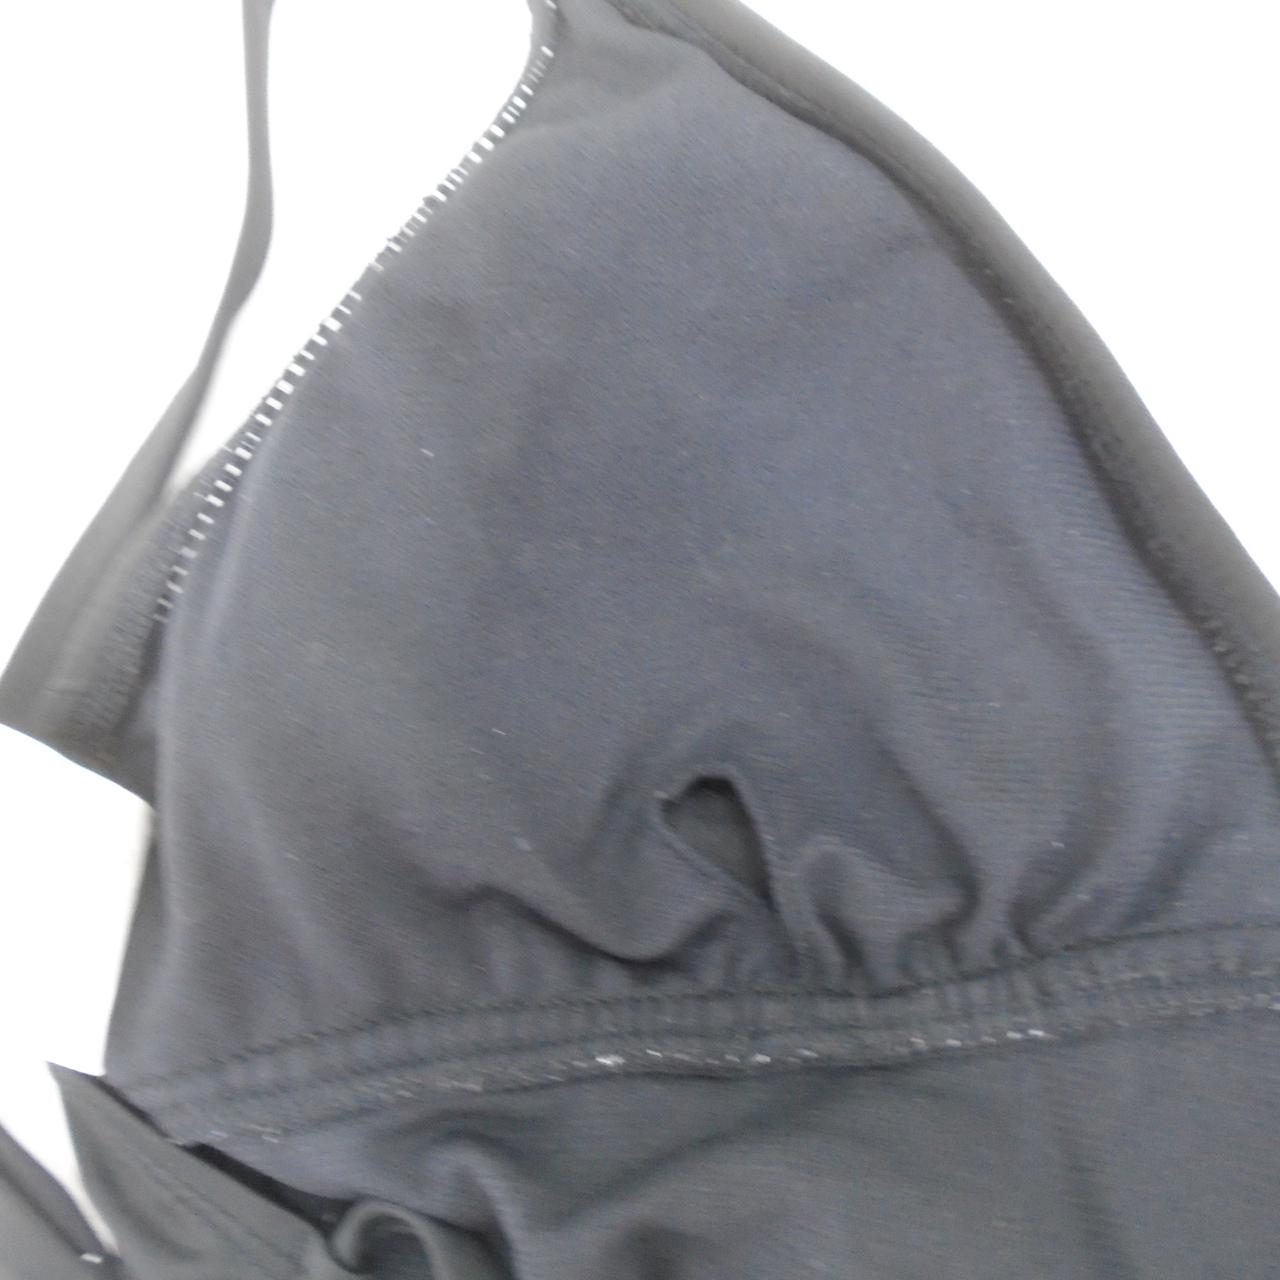 Women's Swimsuit Cleanwater. Black. S. Used. Good